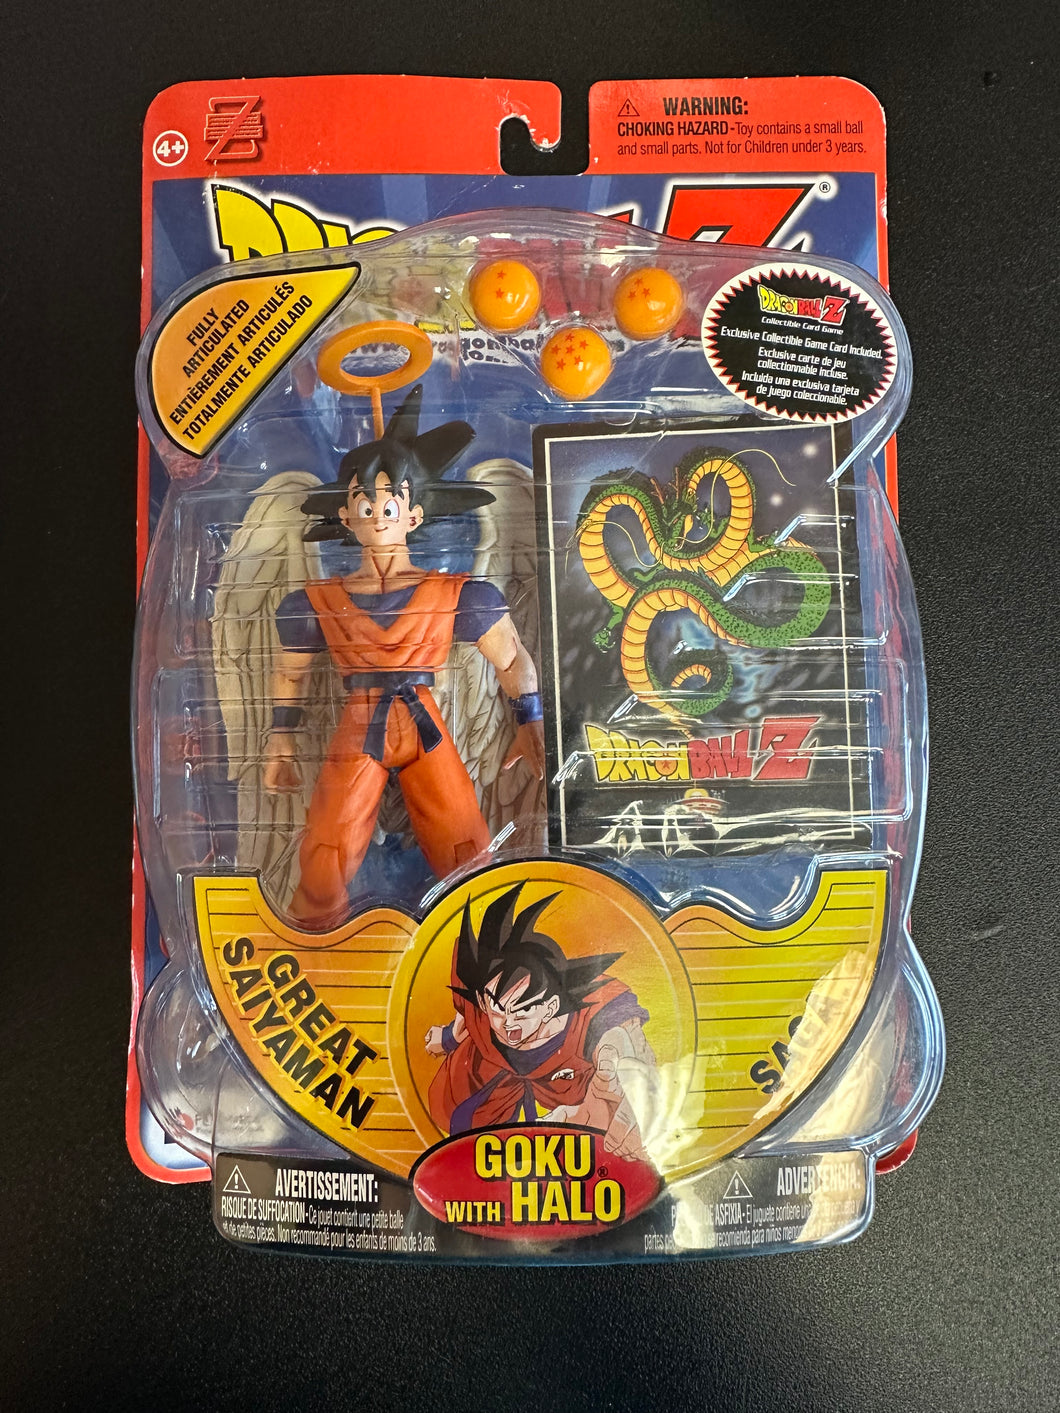 Irwin Toy Dragonball Z Goku with Halo New in Package with Slight Card Damage